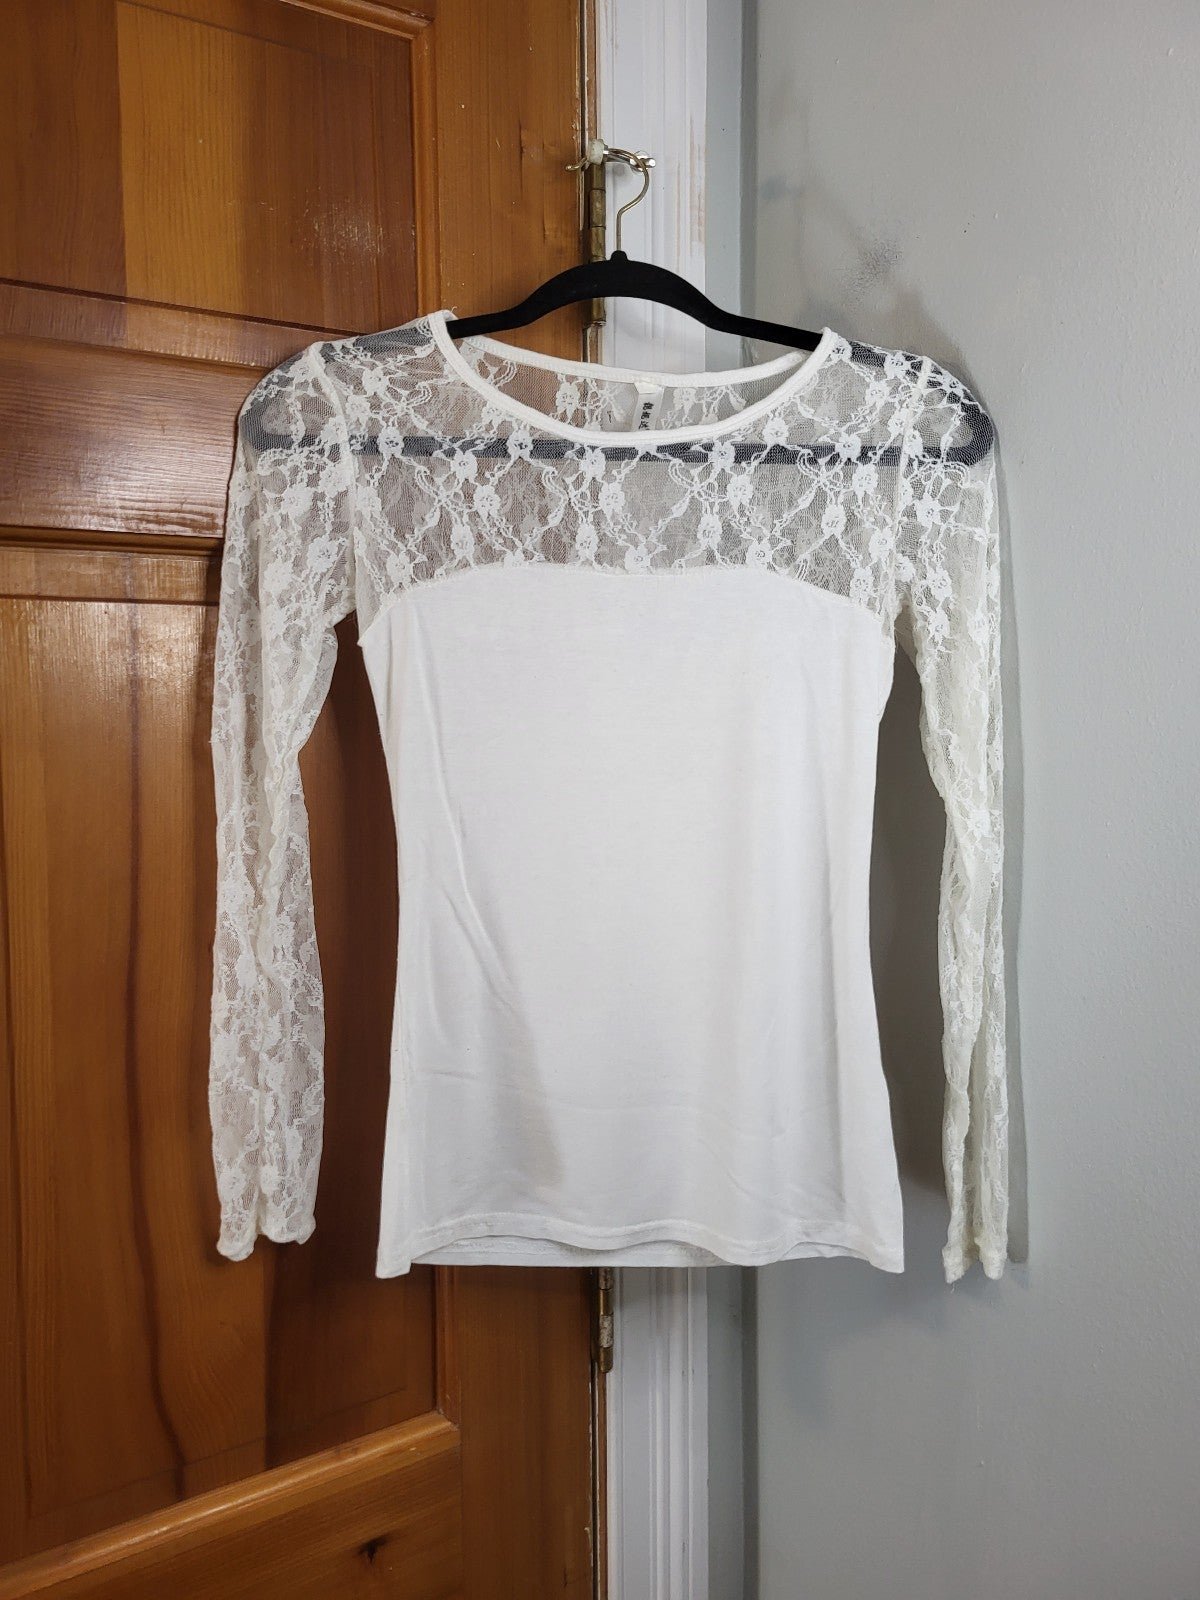 Promotions  Liangnida Stretch Lace Top gwGzZySU6 outlet online shop